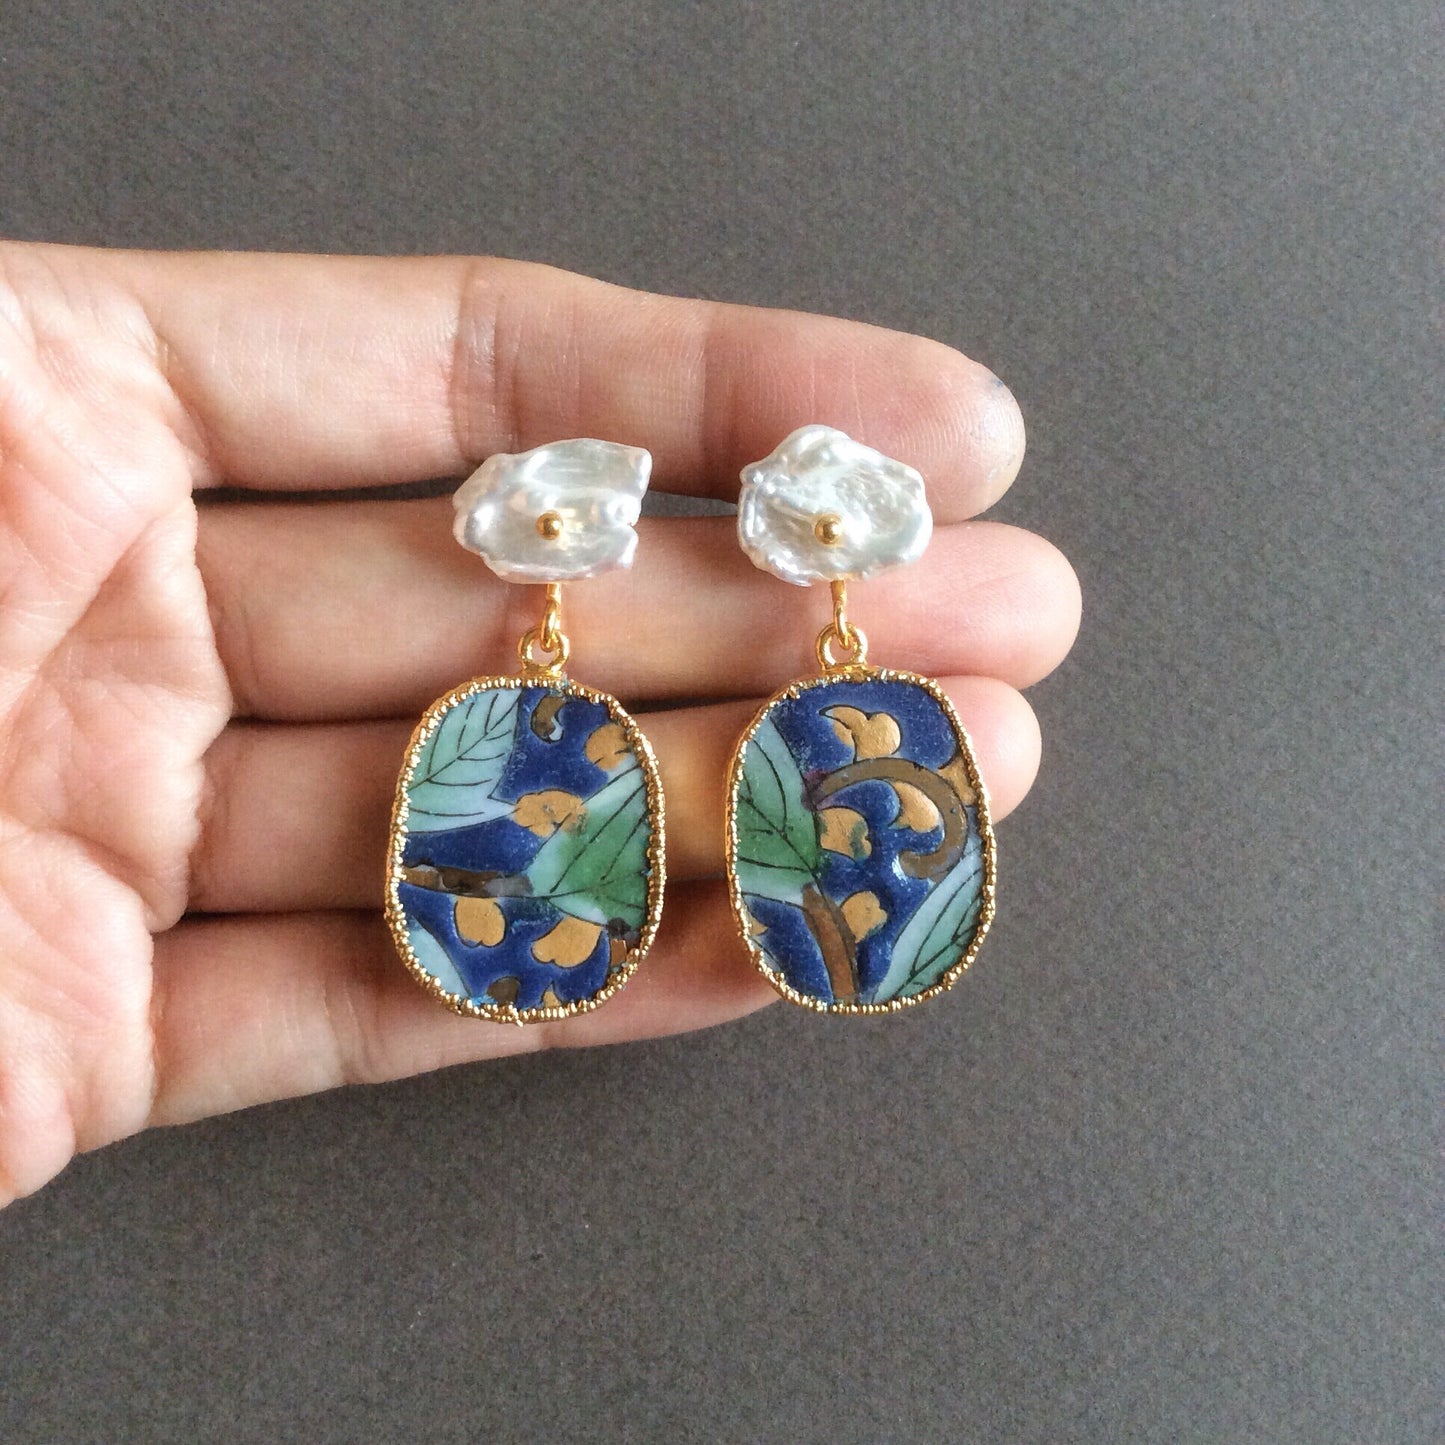 Blue "night scene" chinoiserie porcelain earrings with flat freshwater pearls